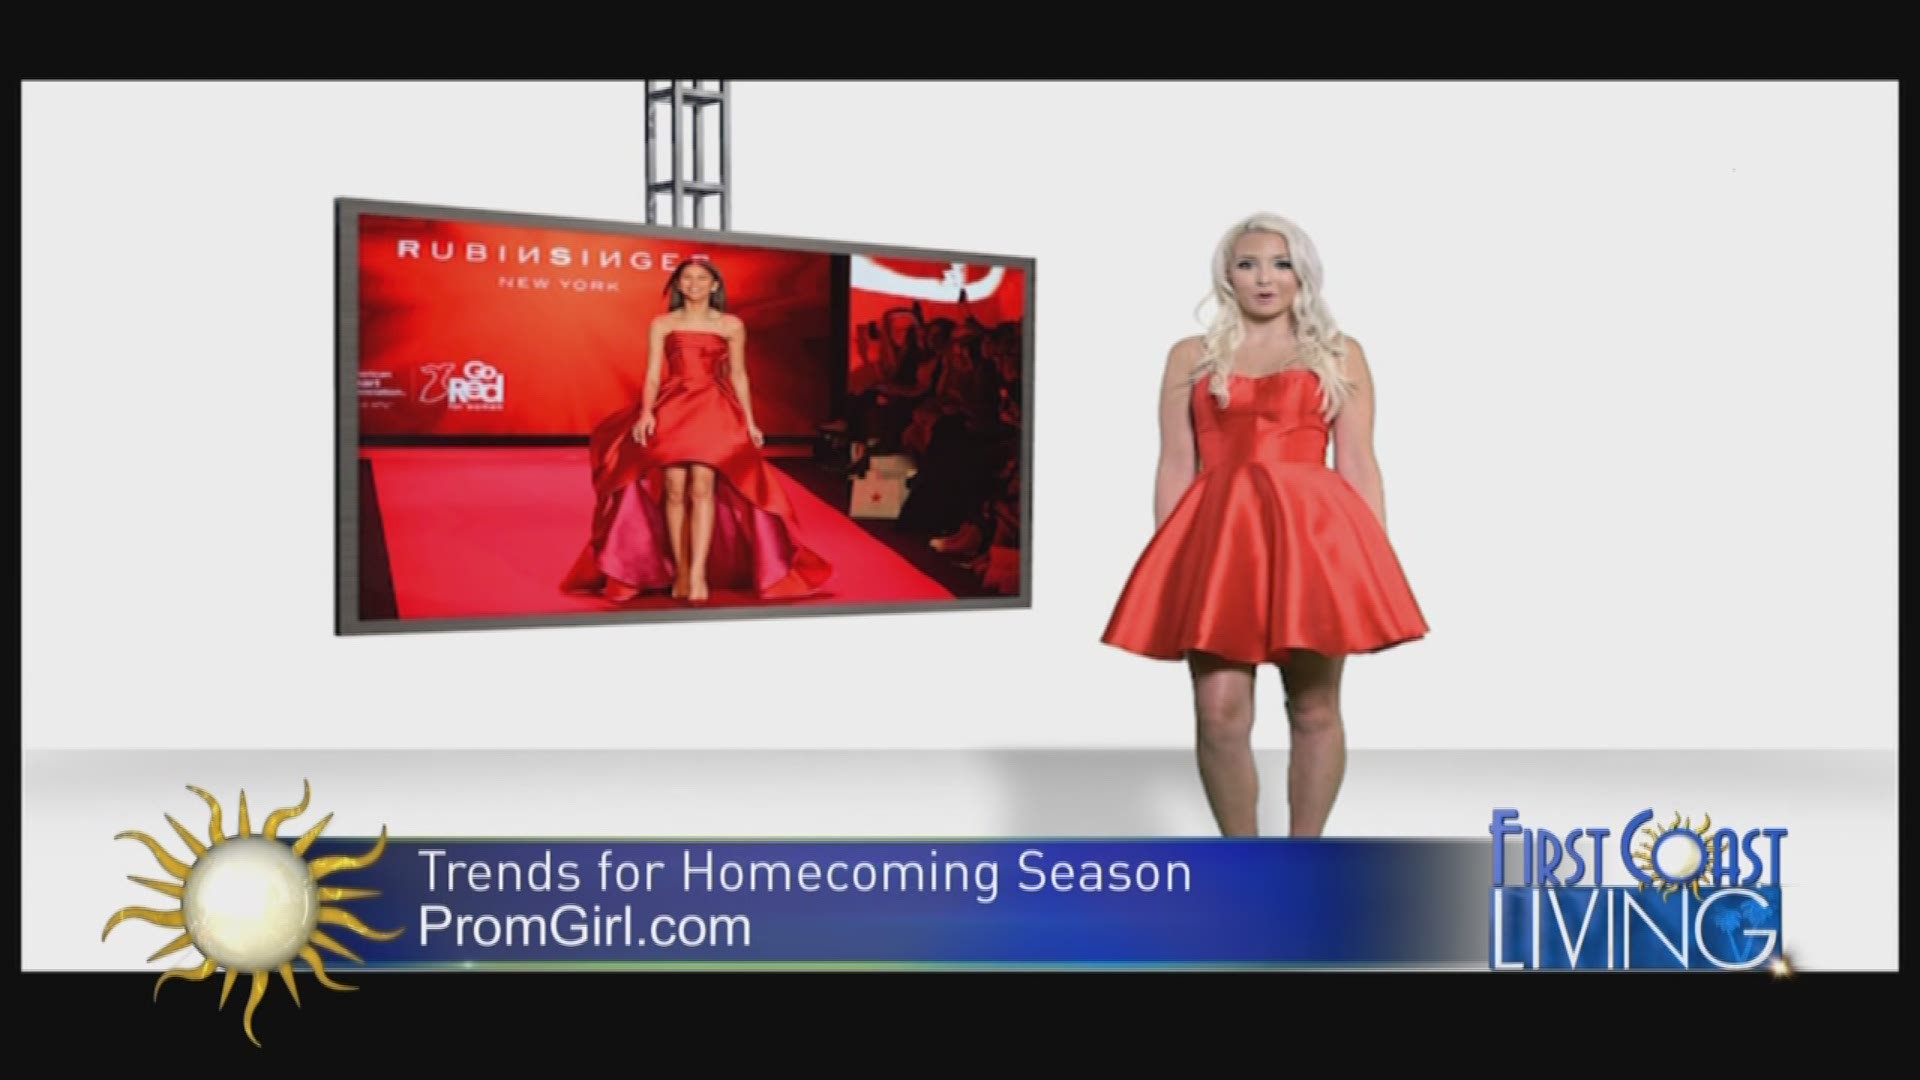 Trends for Homecoming Season